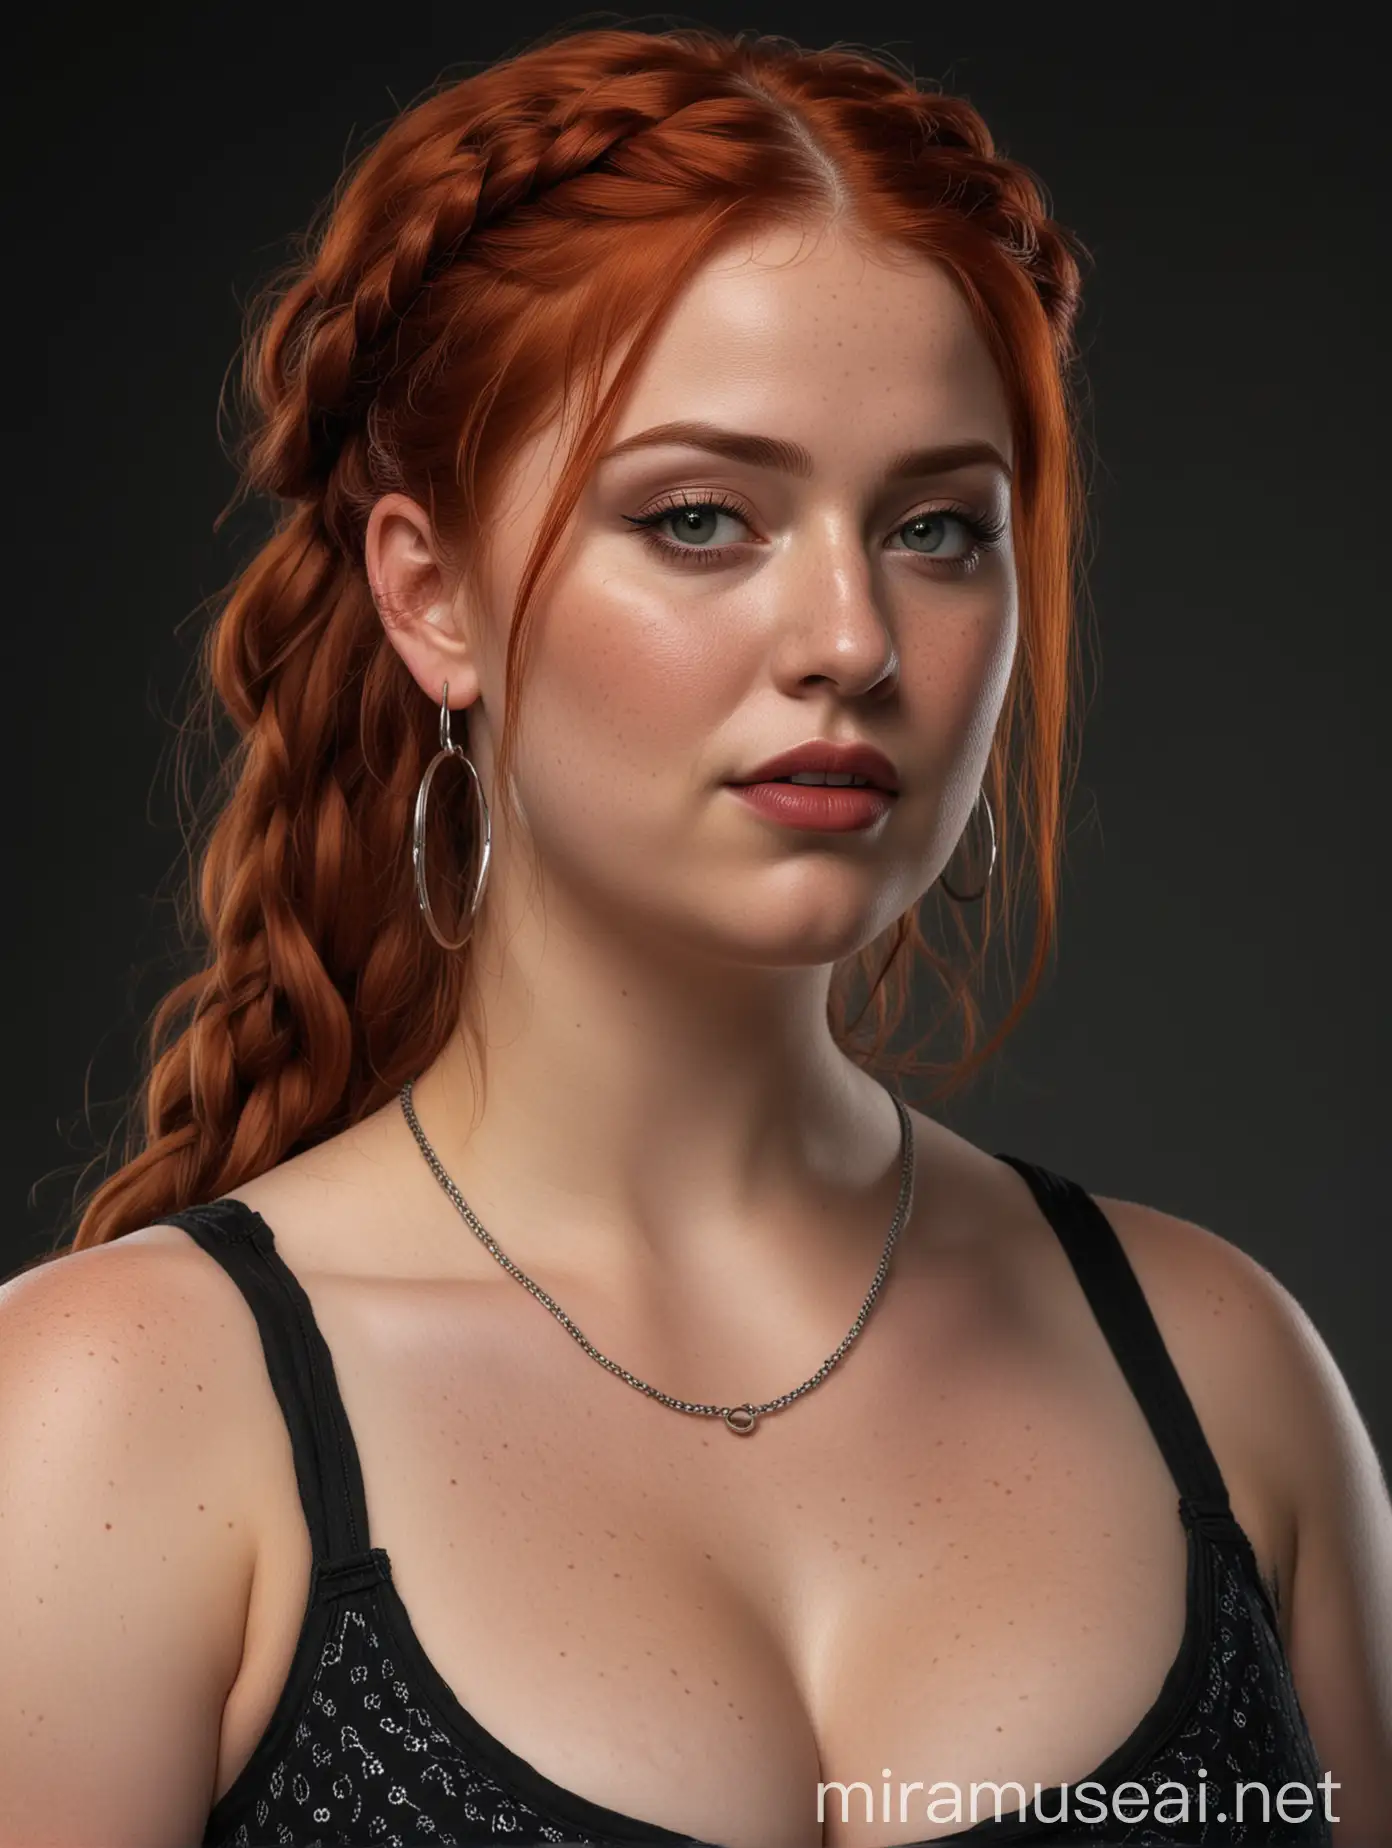 photo realistic, dark background, renaissance style pose, intense facial expression, large, chubby woman, red hair, braids, freckles, black lipstick, black tank top, hoop earrings, 